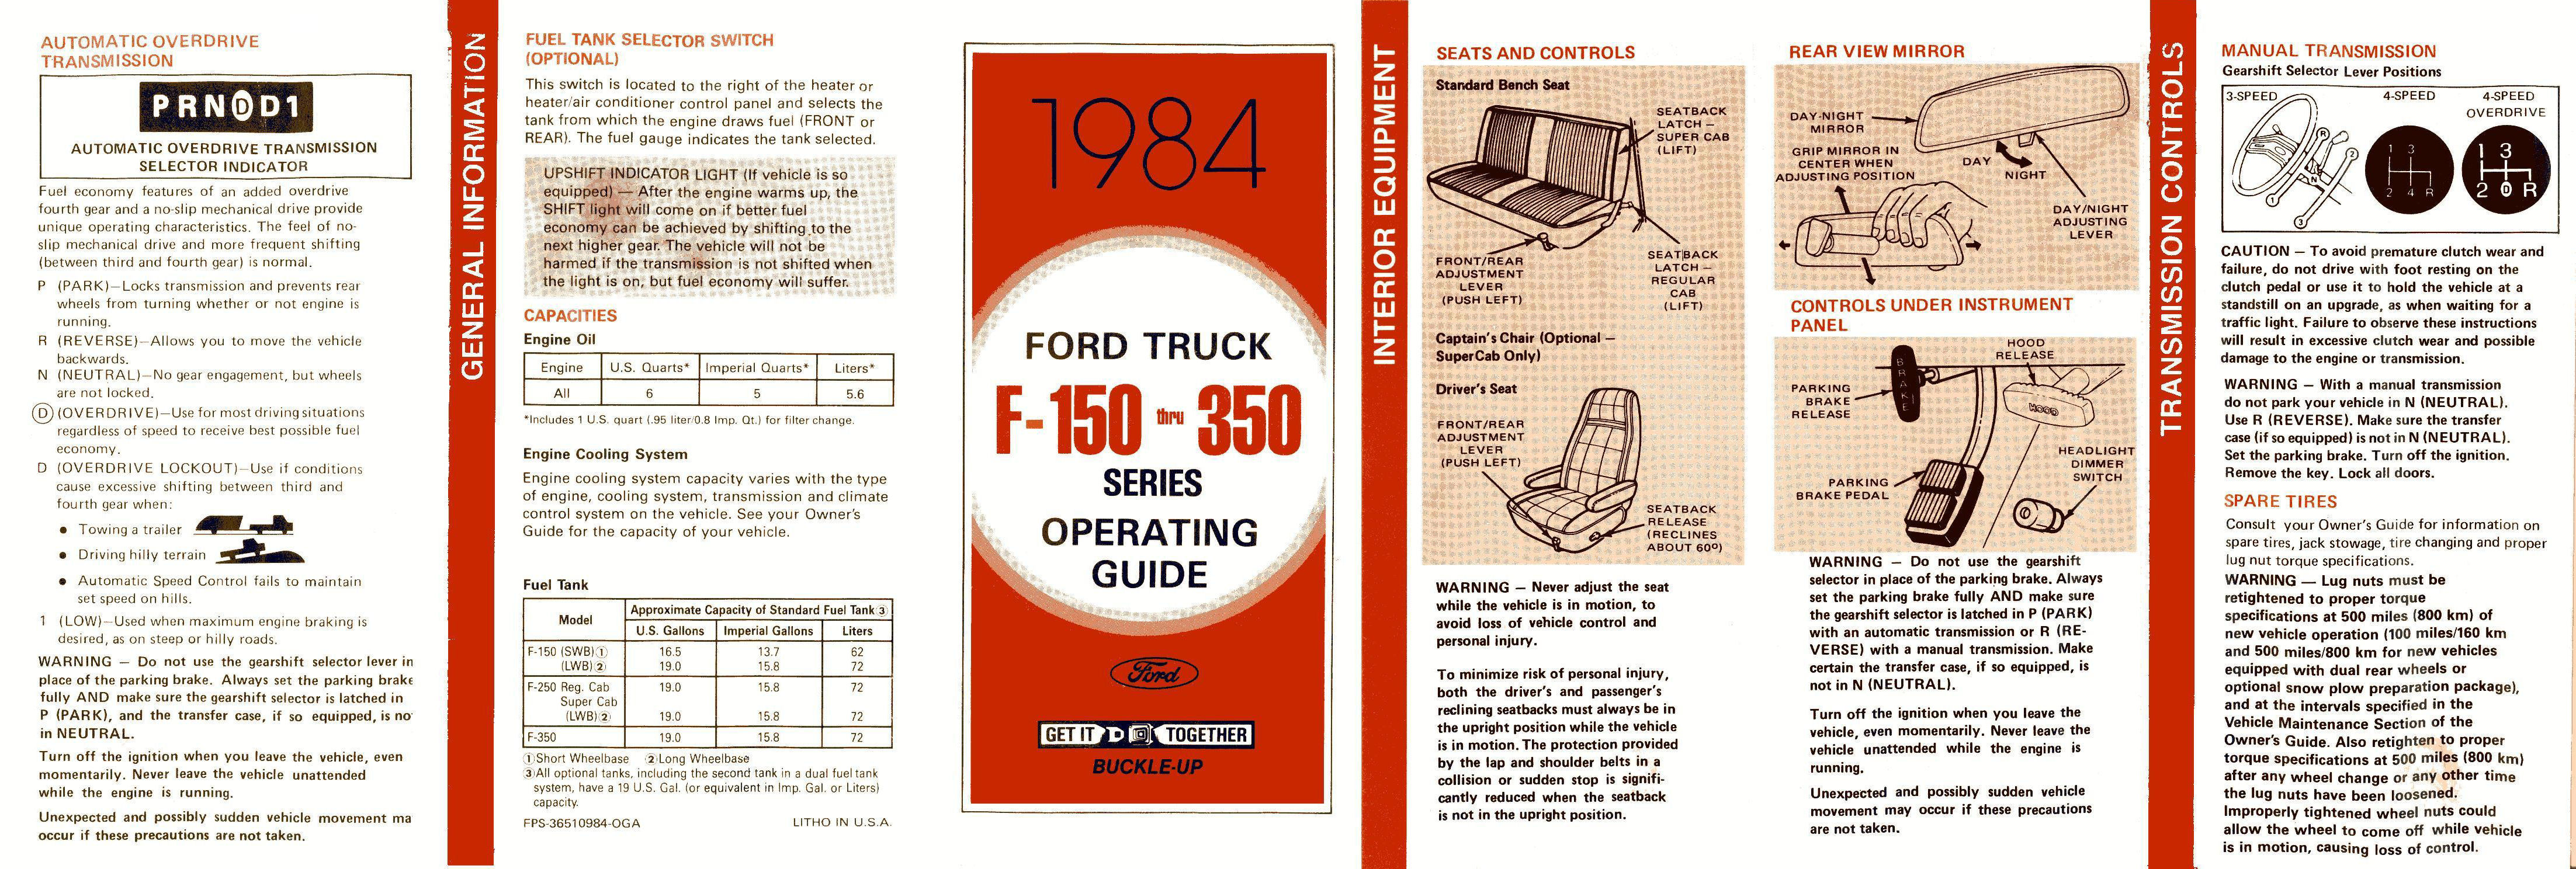 1984_Ford_F_Series_Operating_Guide-01